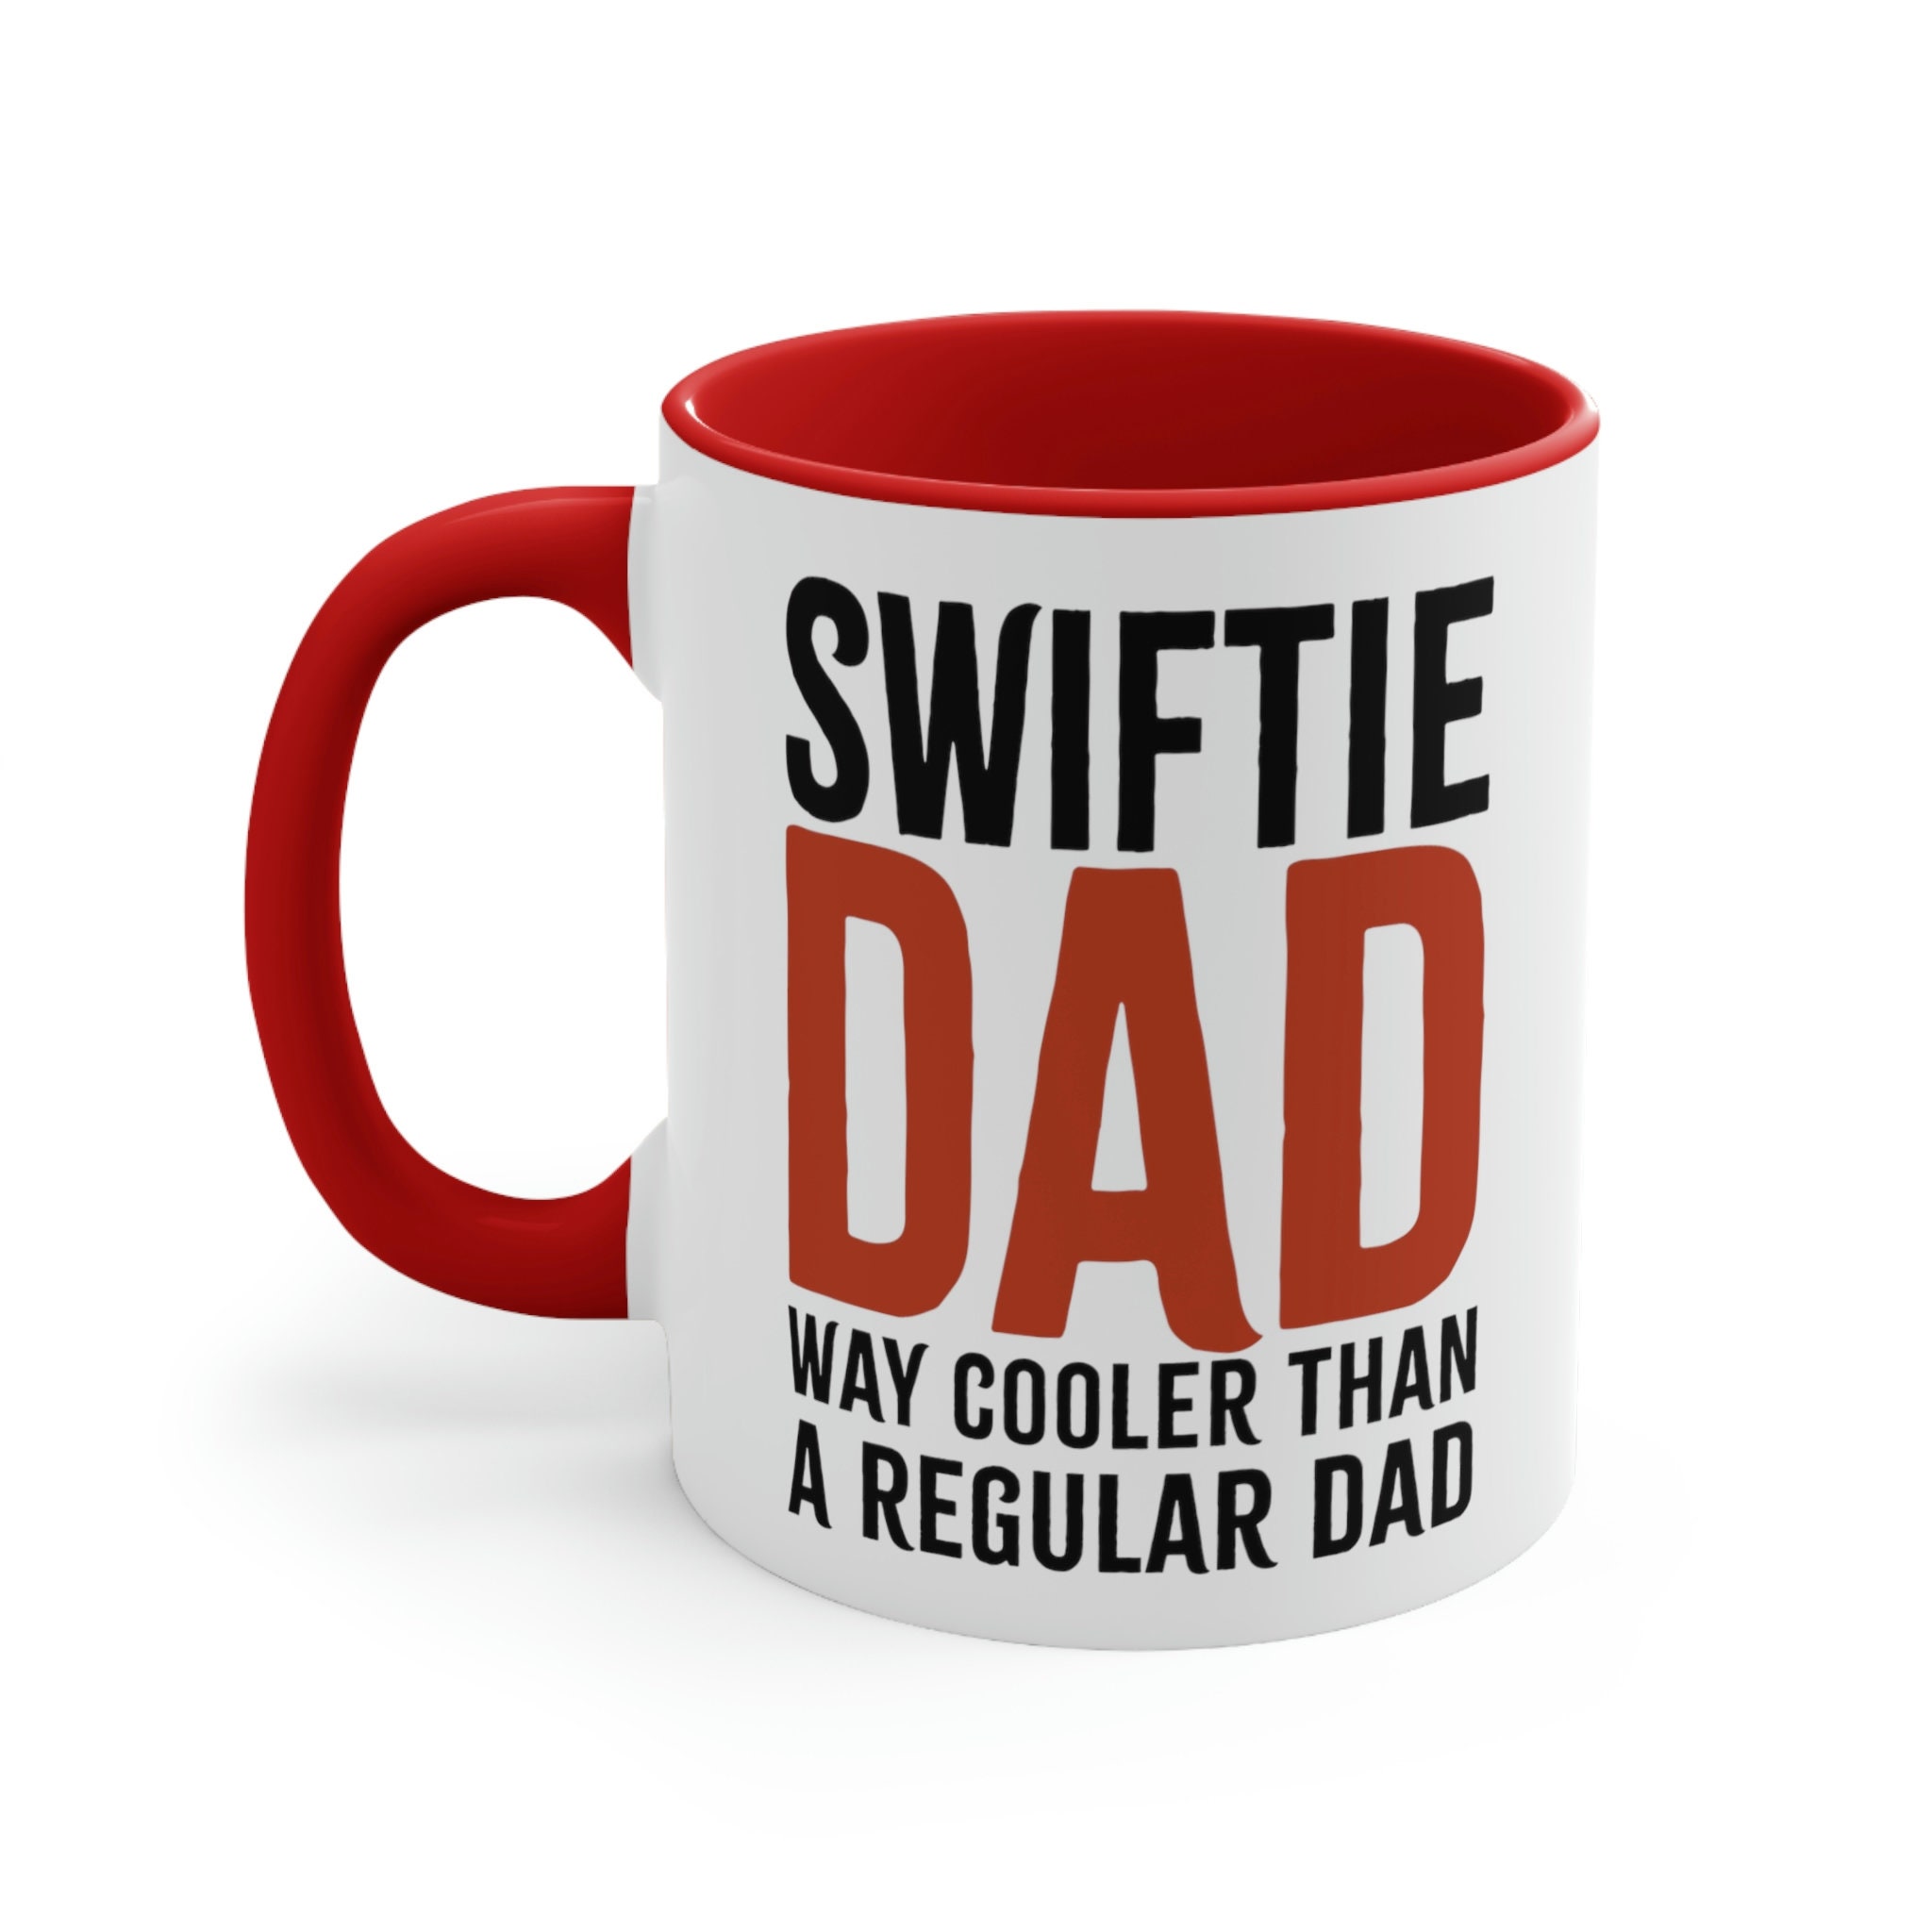 It's Me Hi Taylor Swift Mug Taylor Swift Christmas Gifts for Fans - Happy  Place for Music Lovers